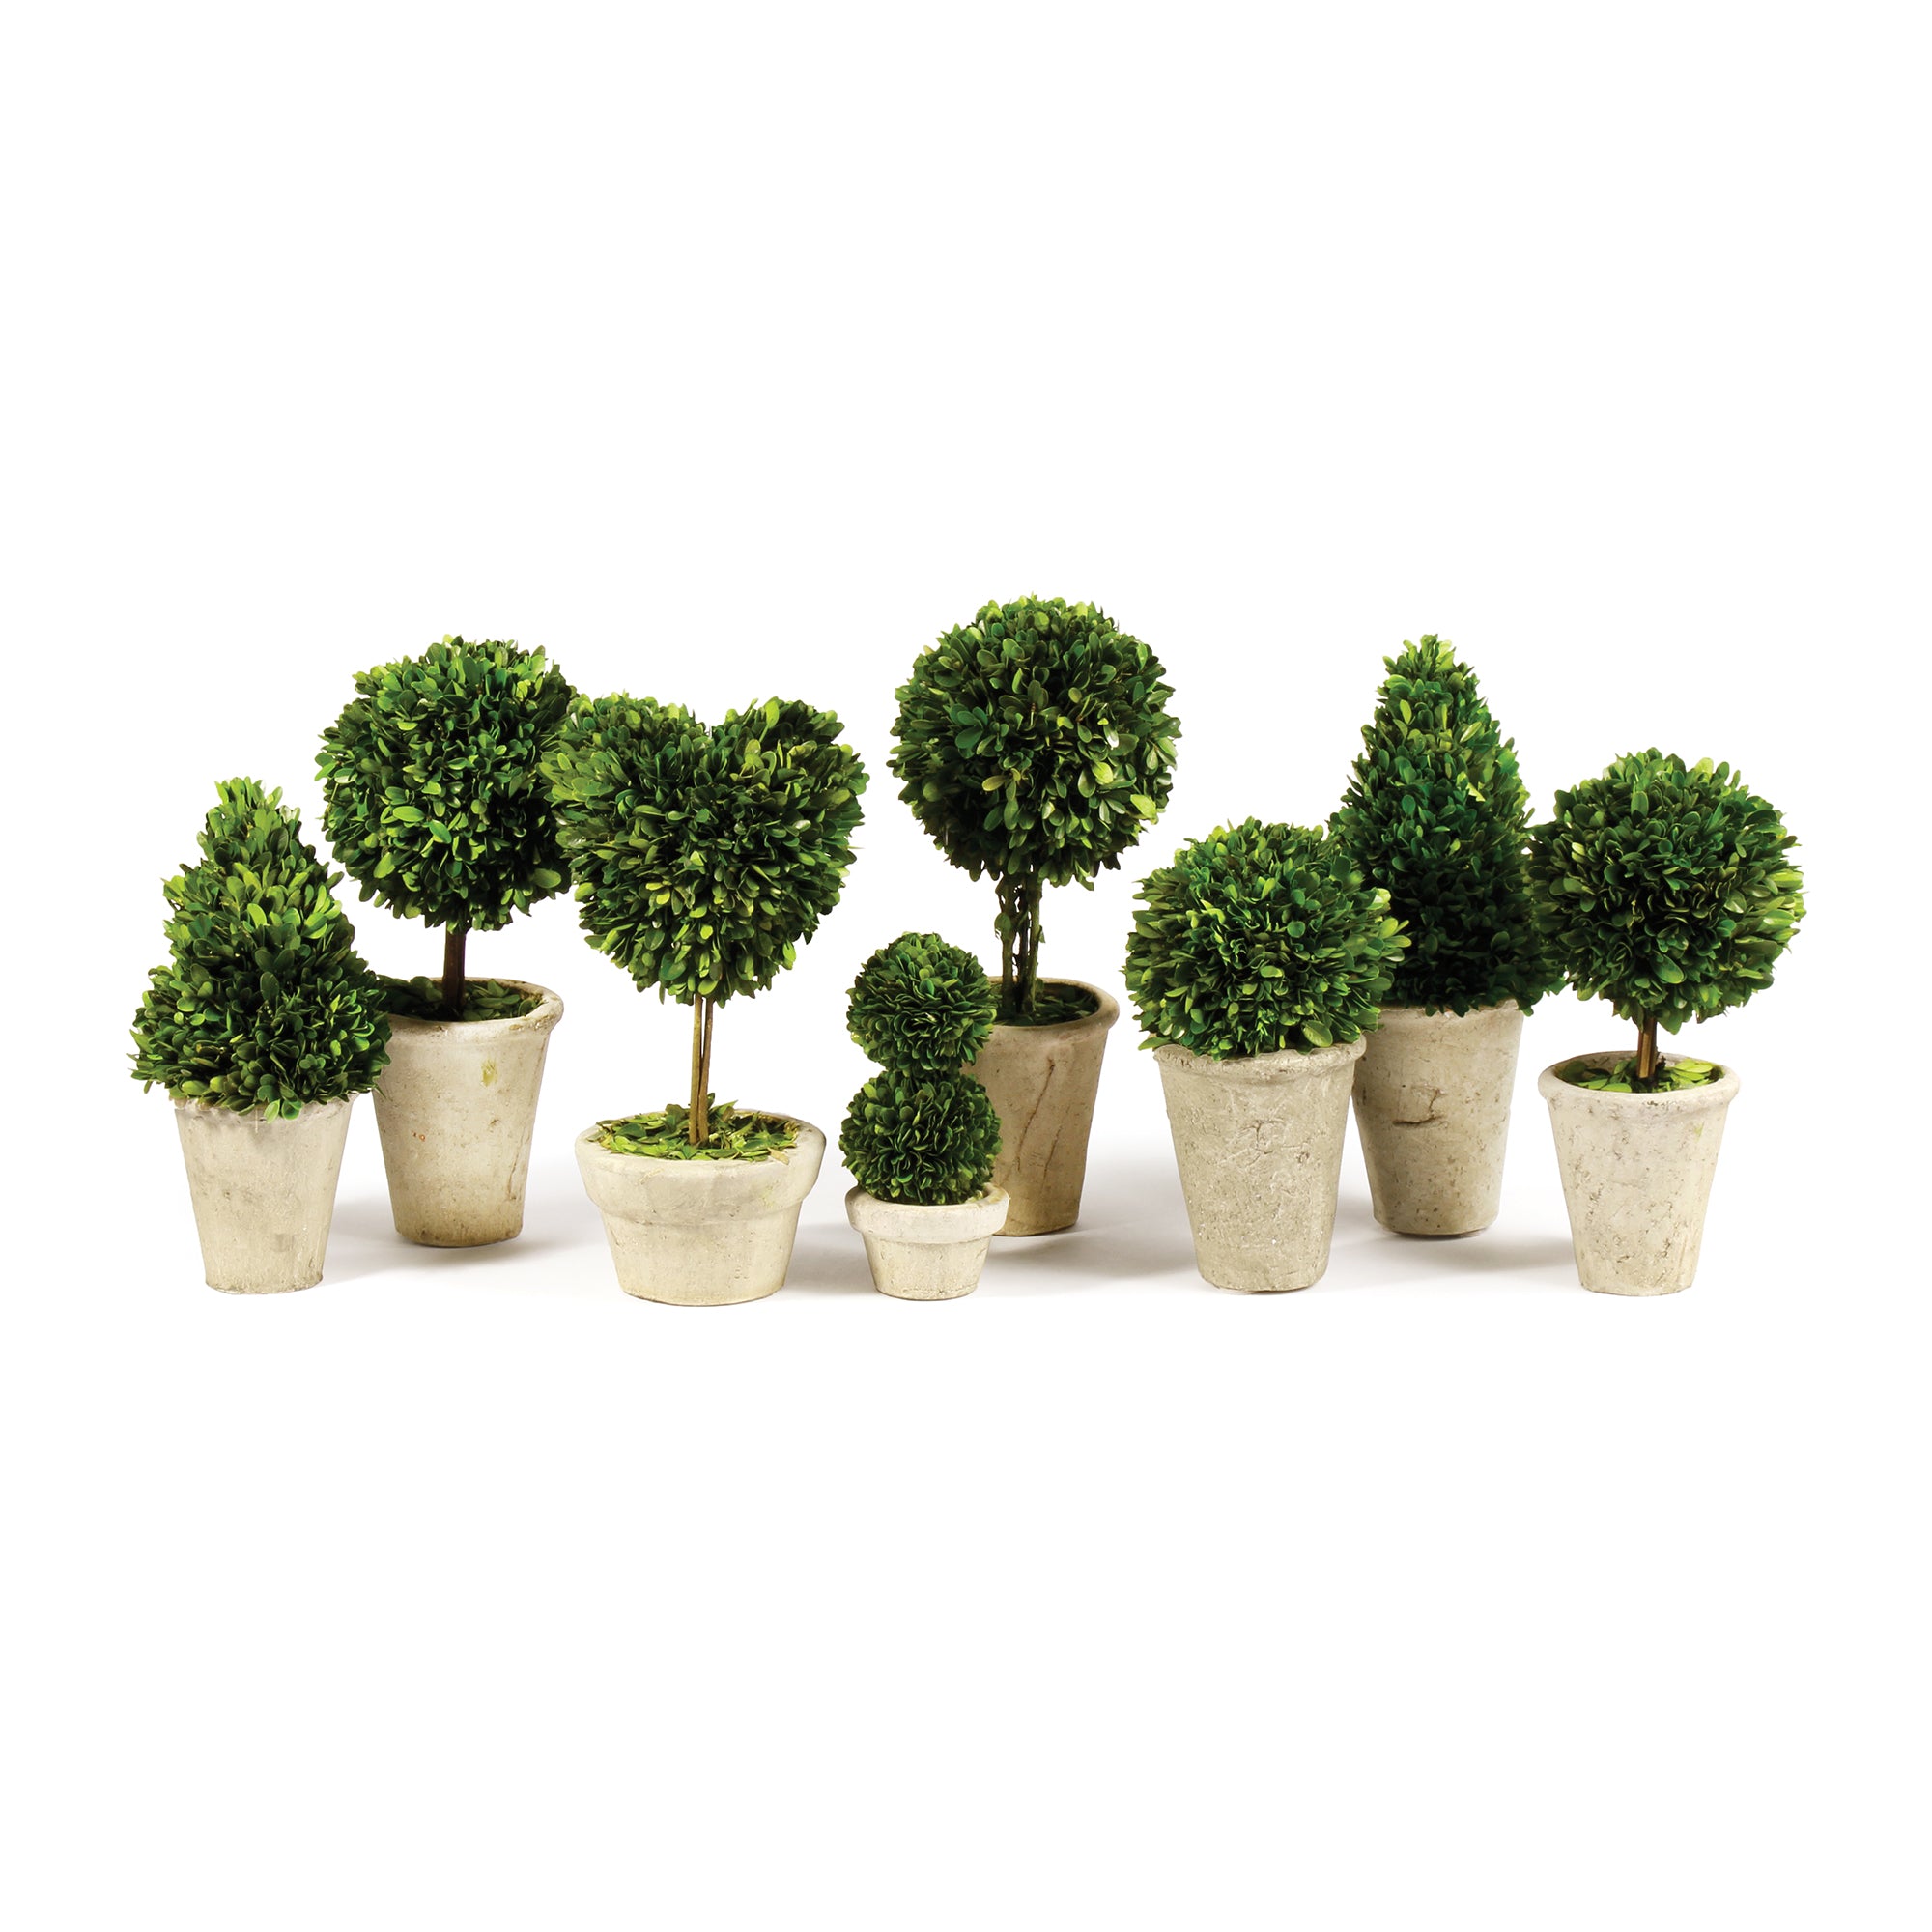 This charming set of 8 mini's are real English boxwoods, preserved and painstakingly assembled by our masterful artists. Artfully arranged and preserved to perfection. A sweet little set for home office or scattered around a bookshelf to add some  whimsy. Amethyst Home provides interior design, new construction, custom furniture, and area rugs in the Park City metro area.